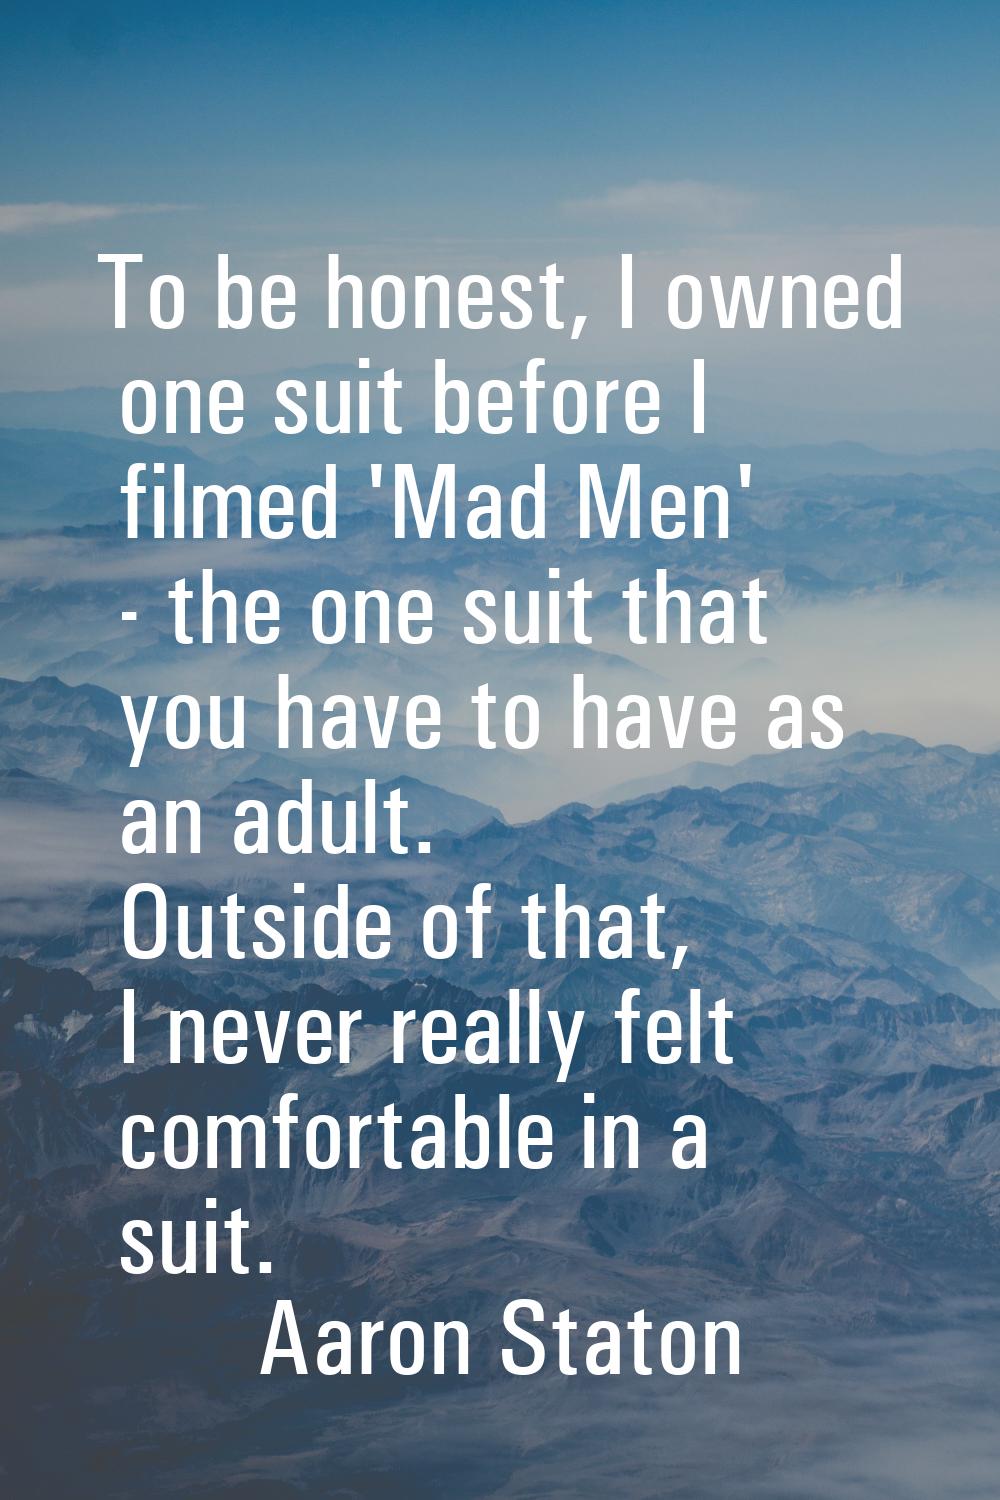 To be honest, I owned one suit before I filmed 'Mad Men' - the one suit that you have to have as an